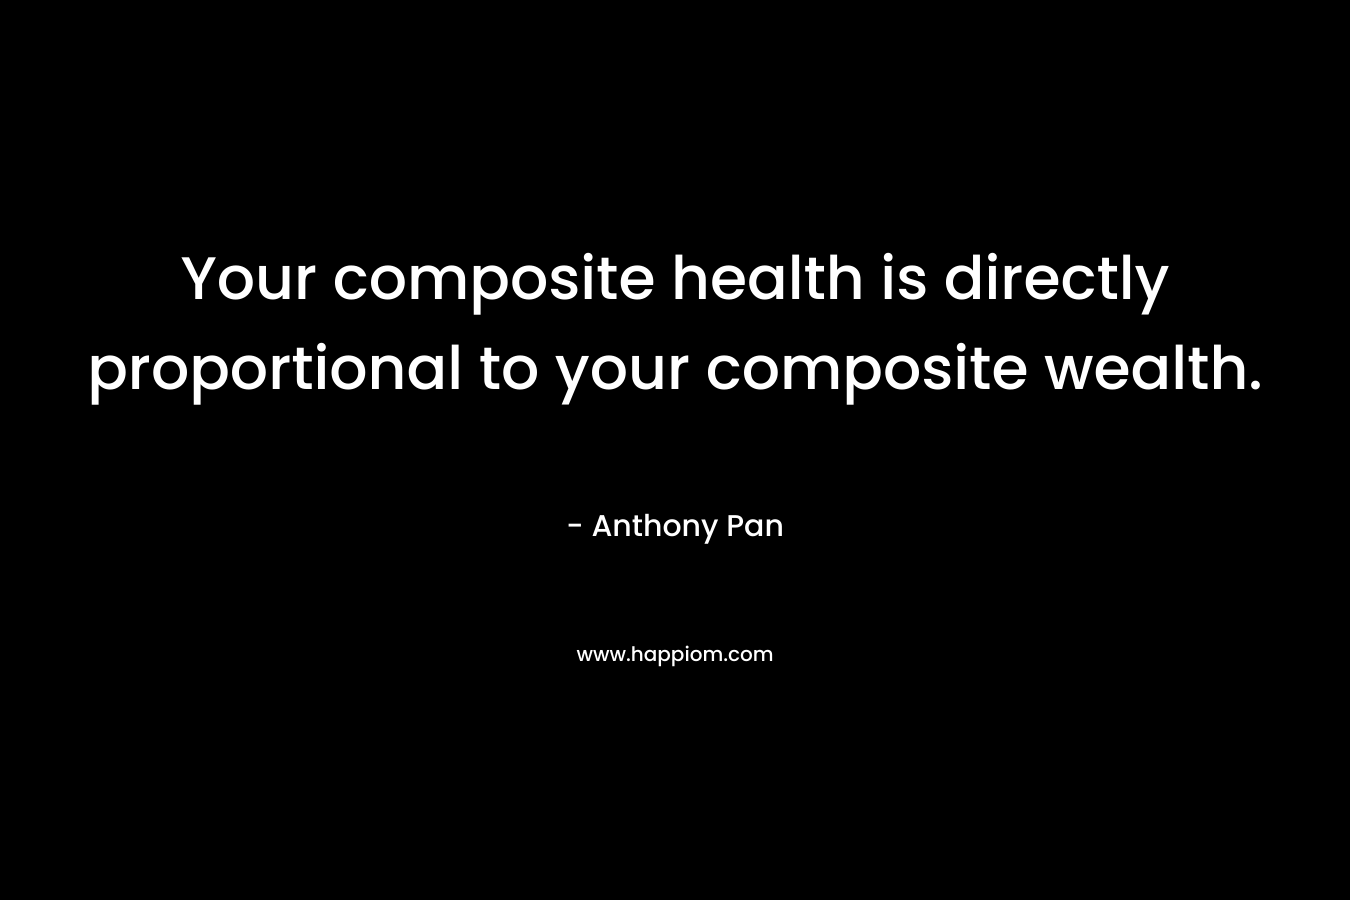 Your composite health is directly proportional to your composite wealth.